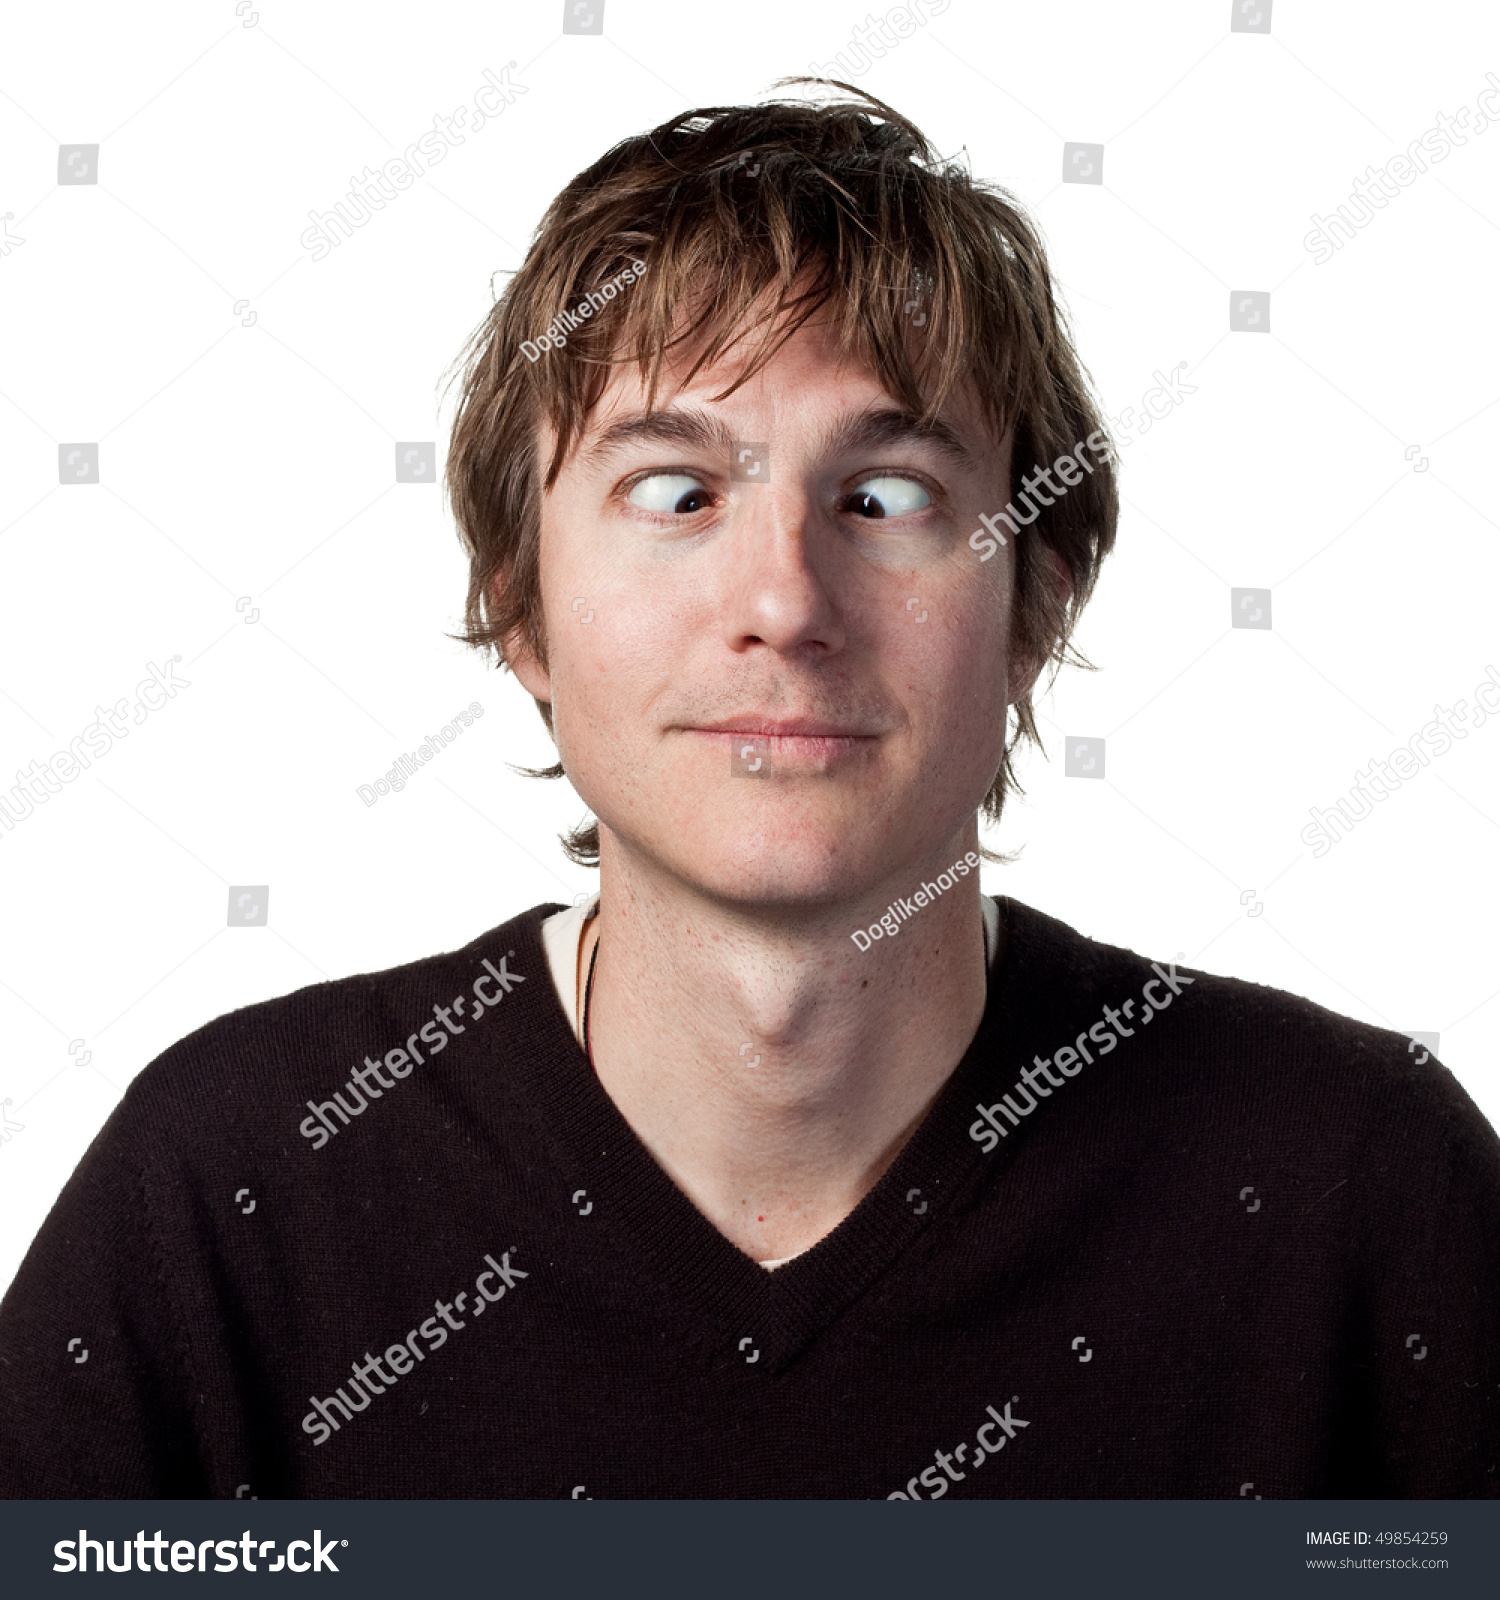 Cross Eyed Man, Series Of Funny Faces Stock Photo 49854259 : Shutterstock